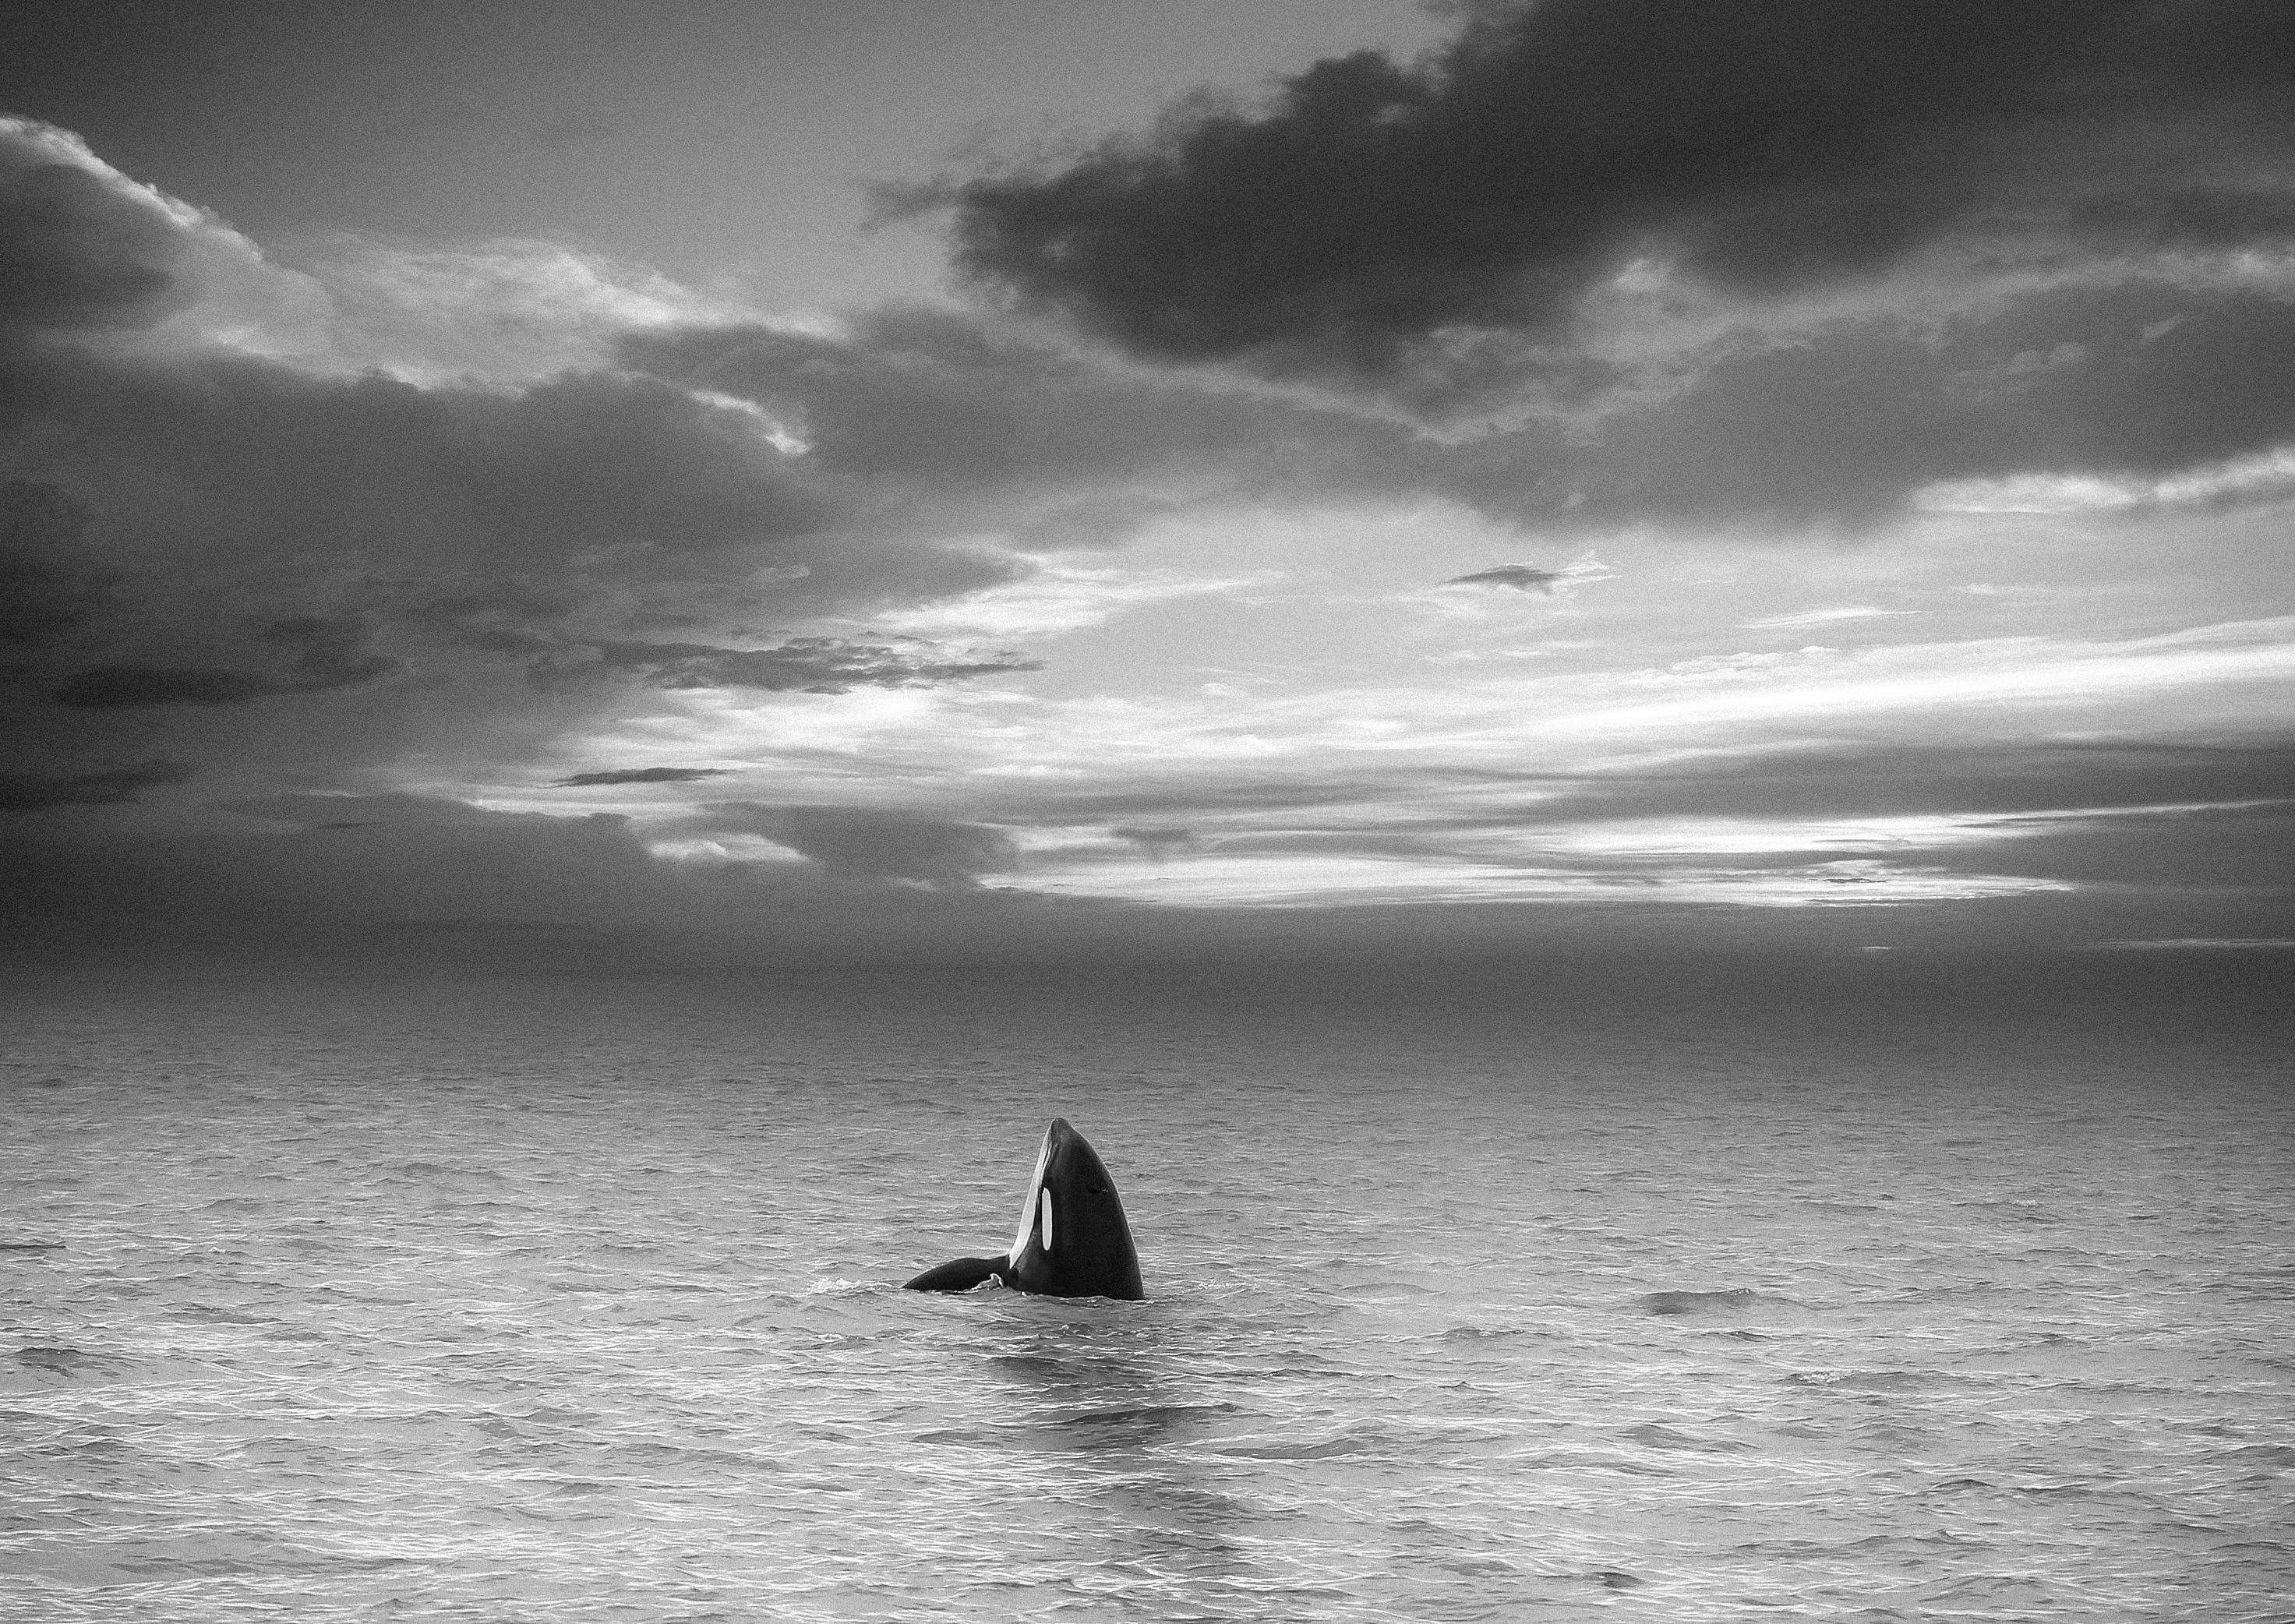 Shane Russeck Animal Print - "To the Heavens" 50x60 Last photograph  Orca "Granny" Killer Whale Photography